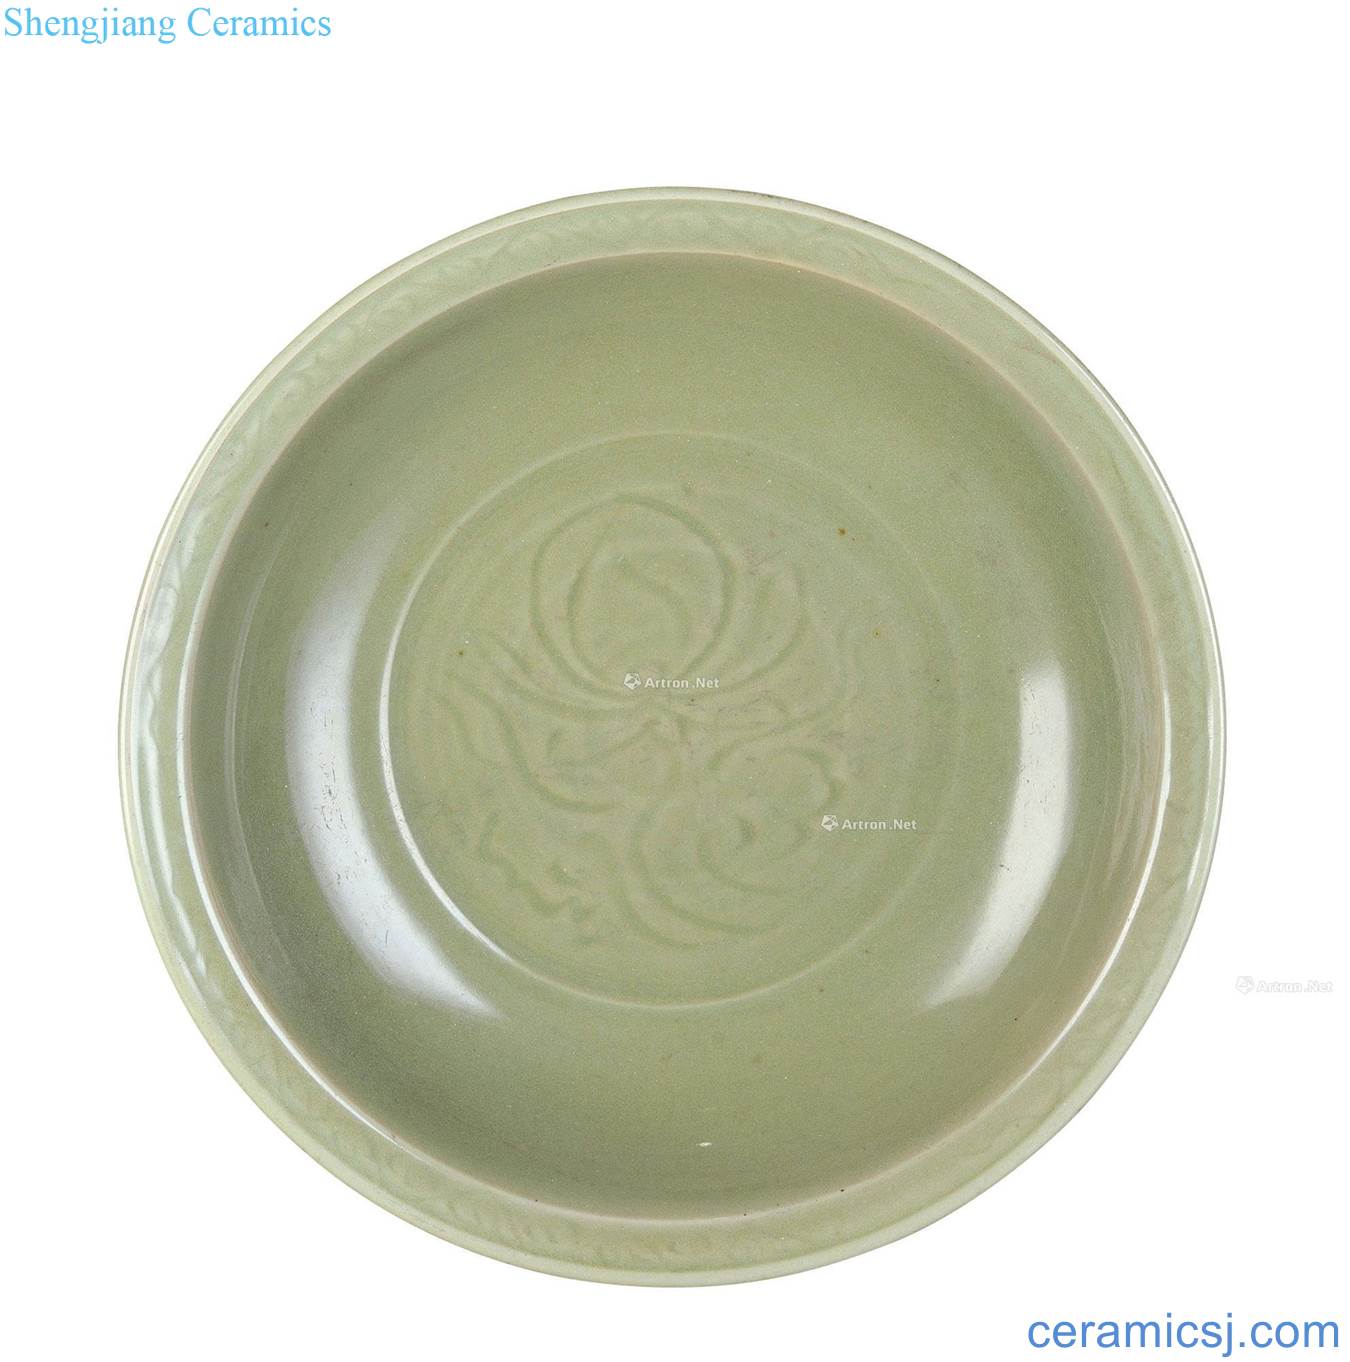 At the end of the yuan Longquan celadon plate